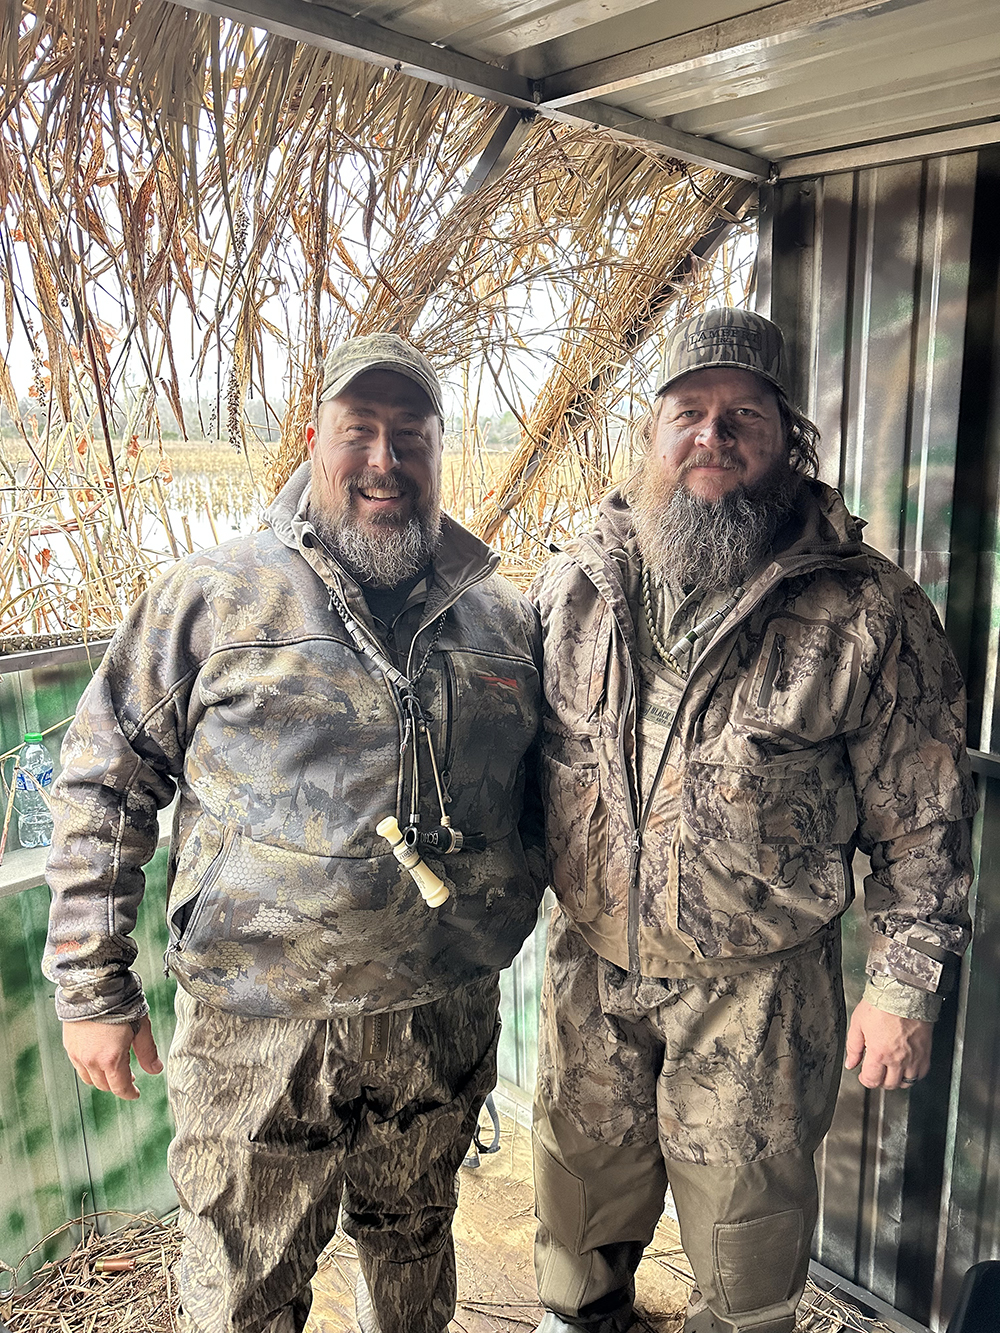 Chef Jay Holcomb and co-owner John Paul Lambert have been duck hunting together for more than 24 years, and run duck Blind Bistro.